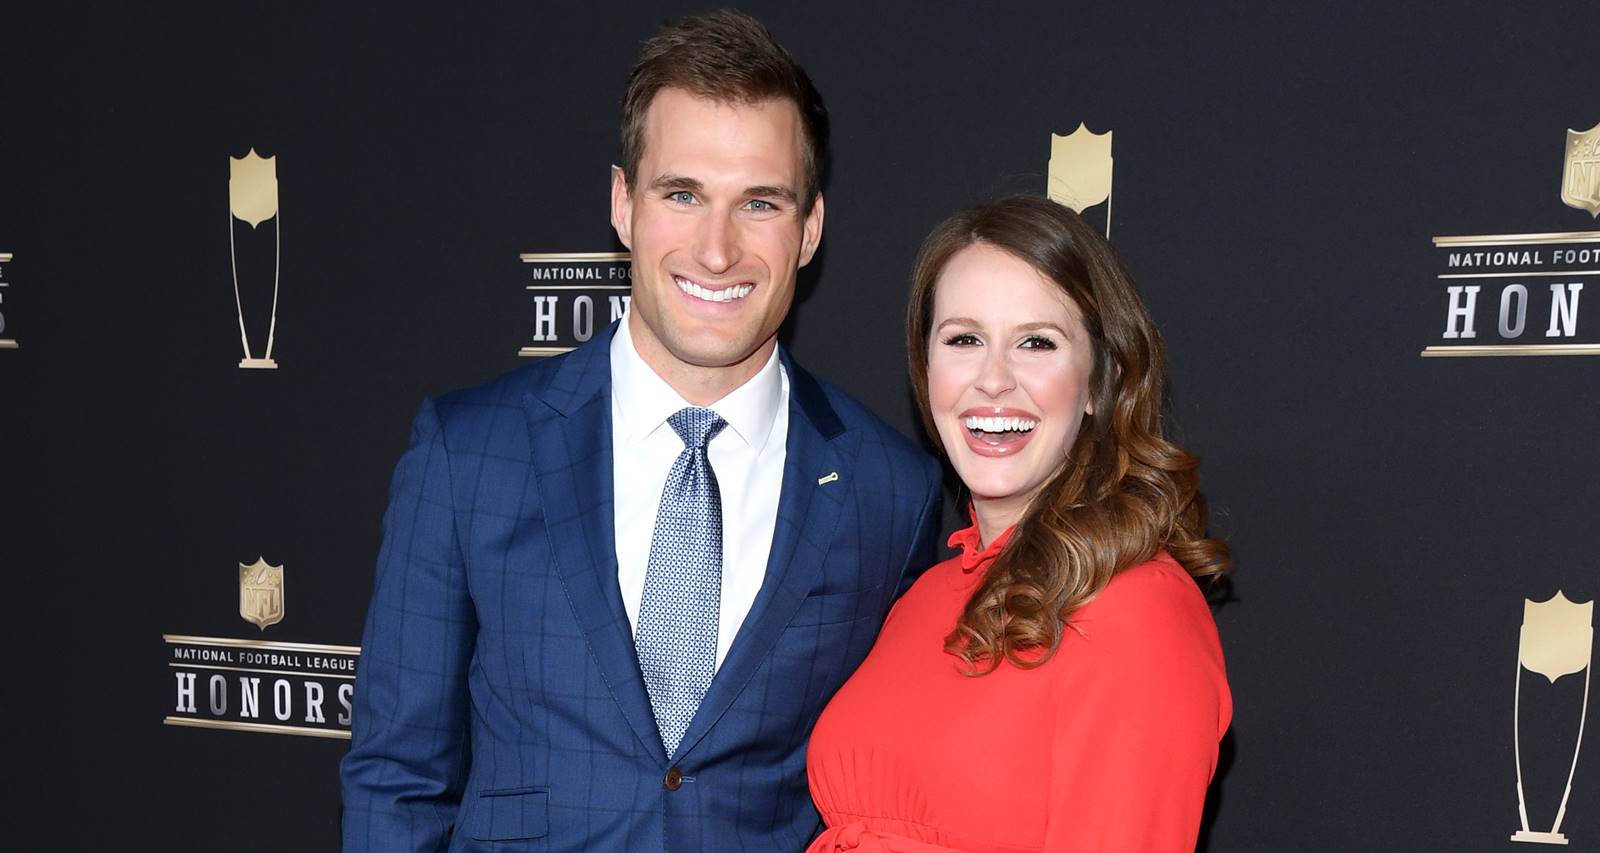 Julie Hampton Cousins Wiki, Age, Family, Kids, Education and Facts About NFL Quarterback, Kirk Cousins’ Wife